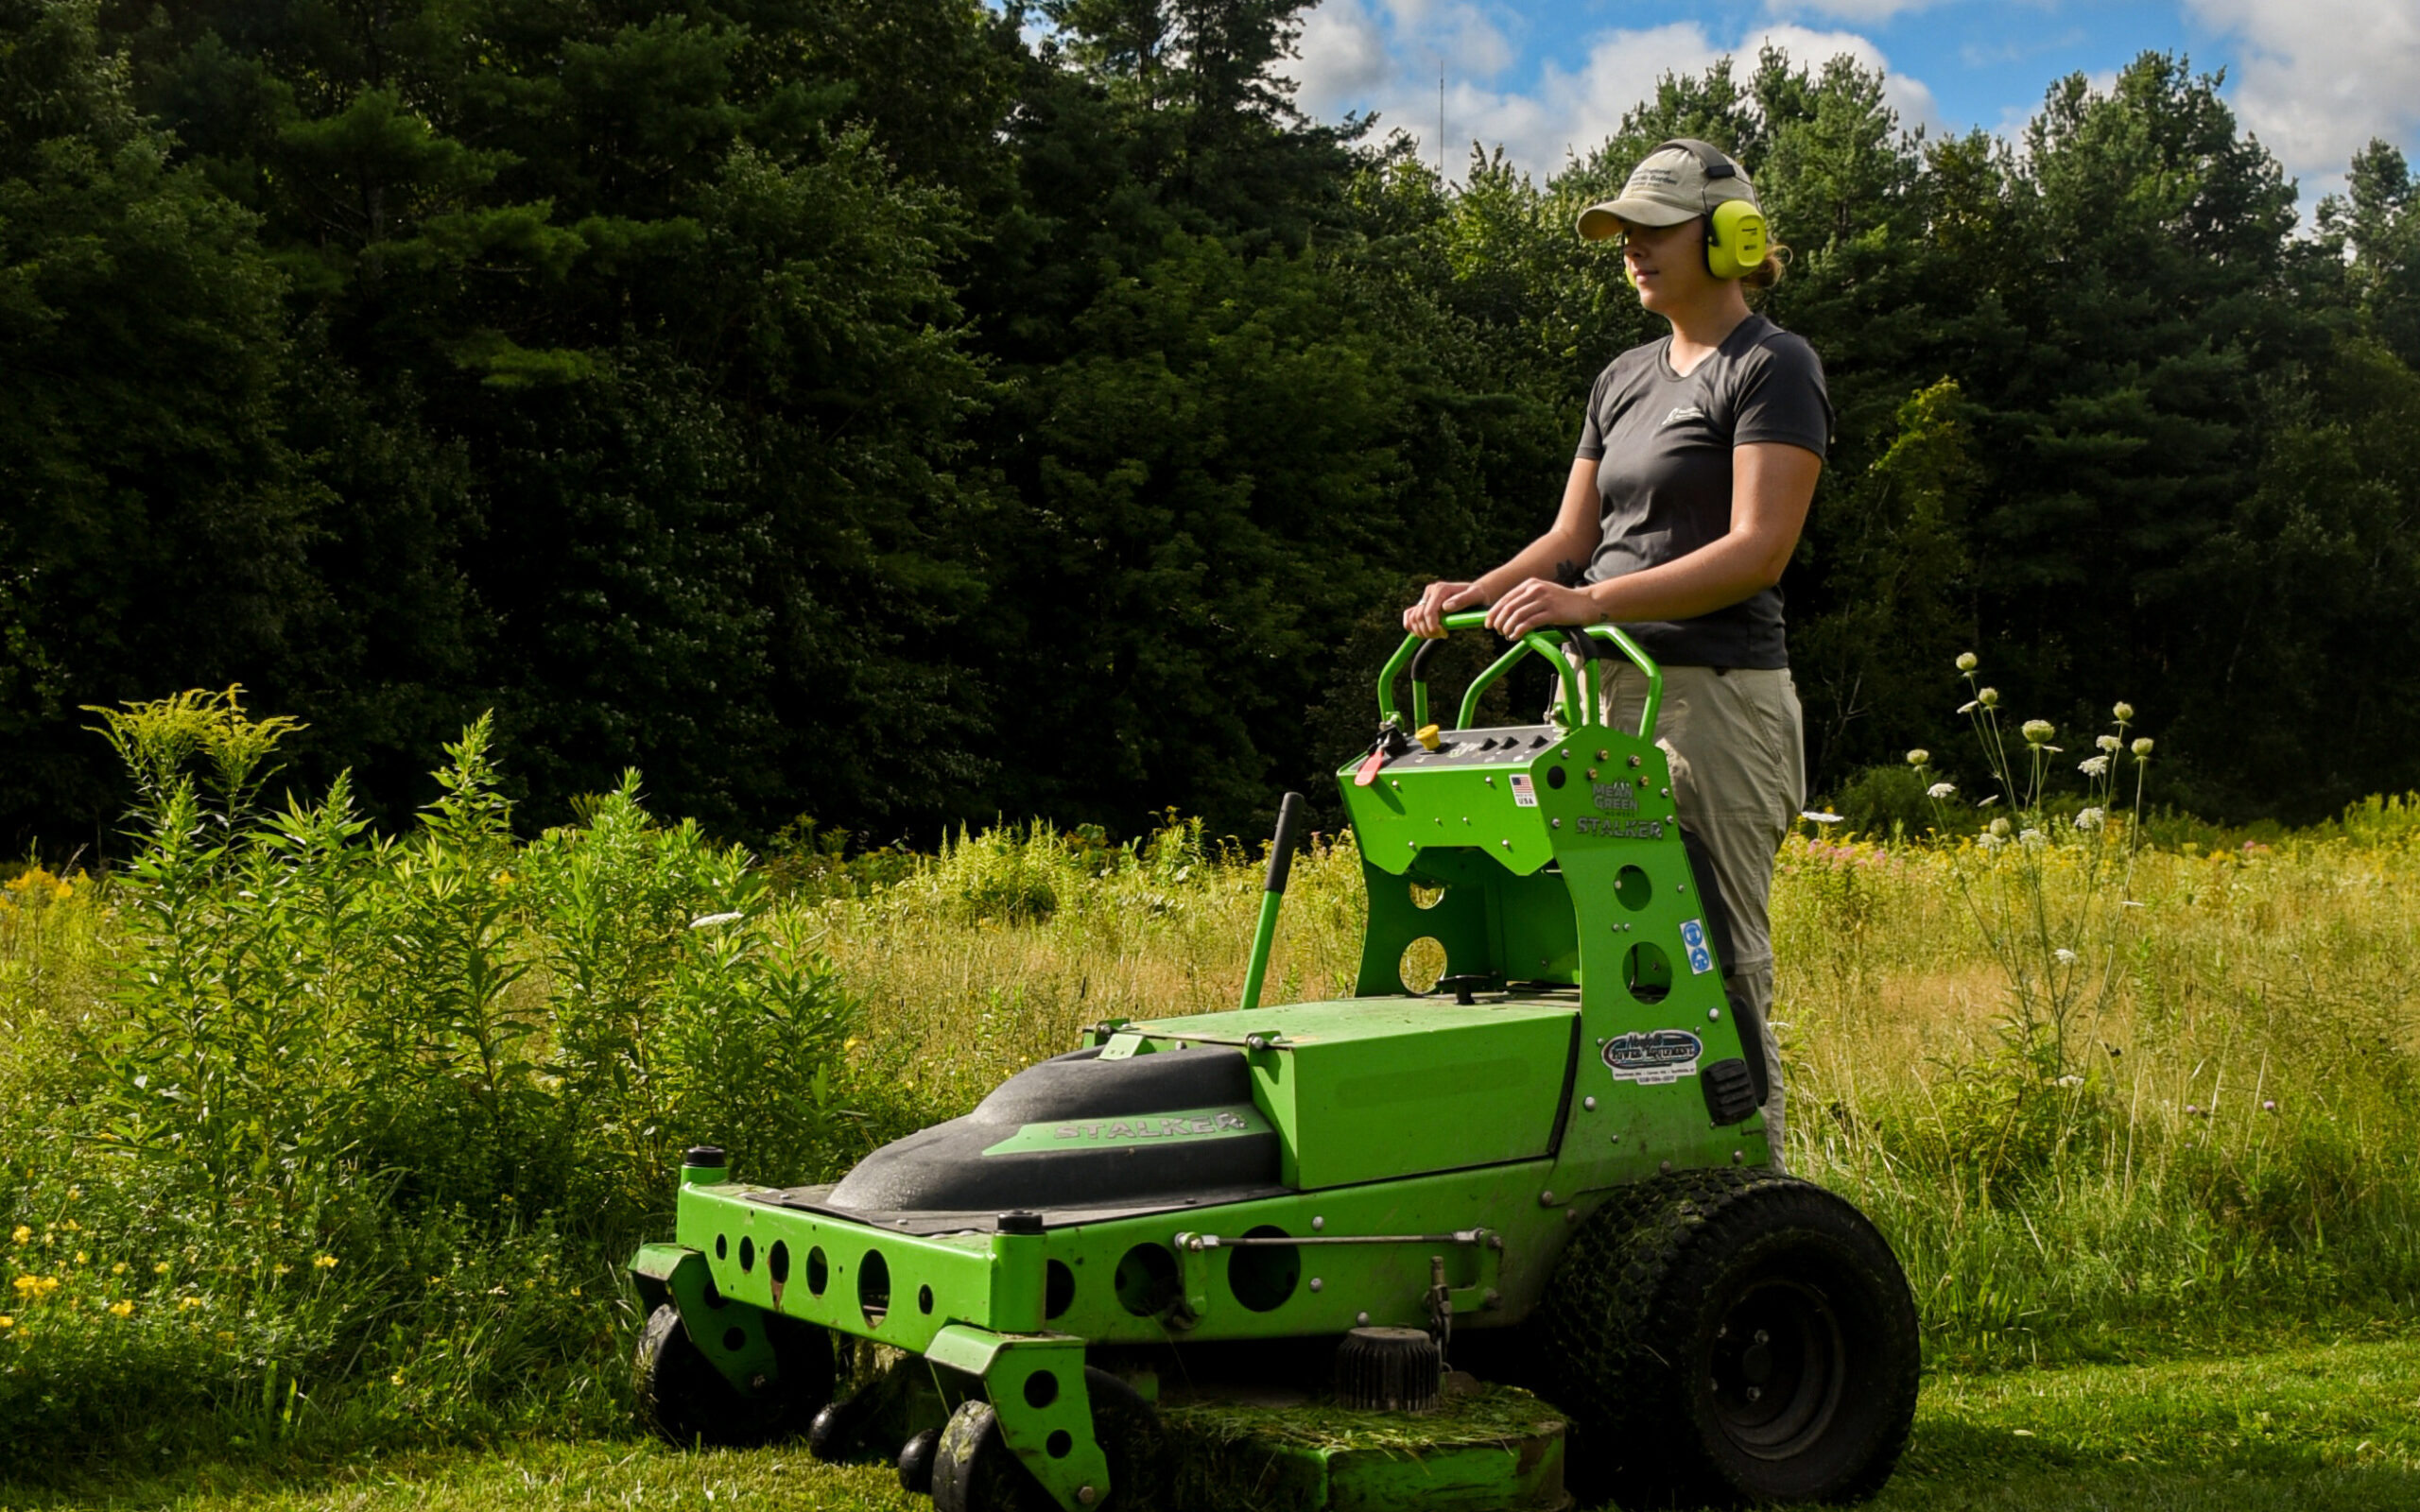 Horticulture member using electric mower beside one of the Garden's meadows.